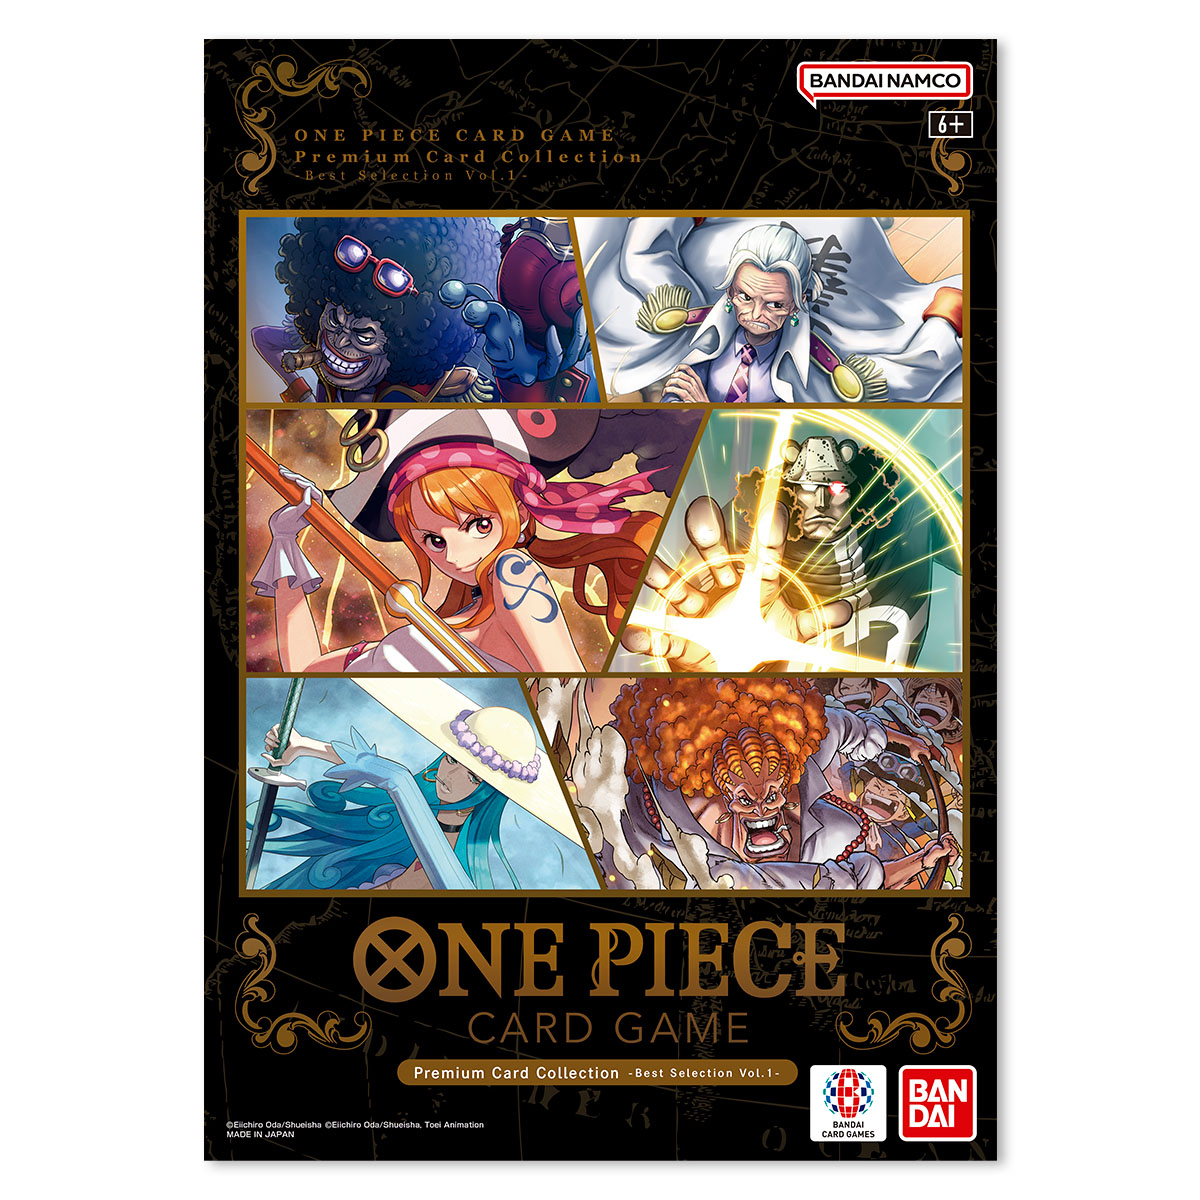 ONE PIECE CARD GAME Premium Card Collection -Best Selection-